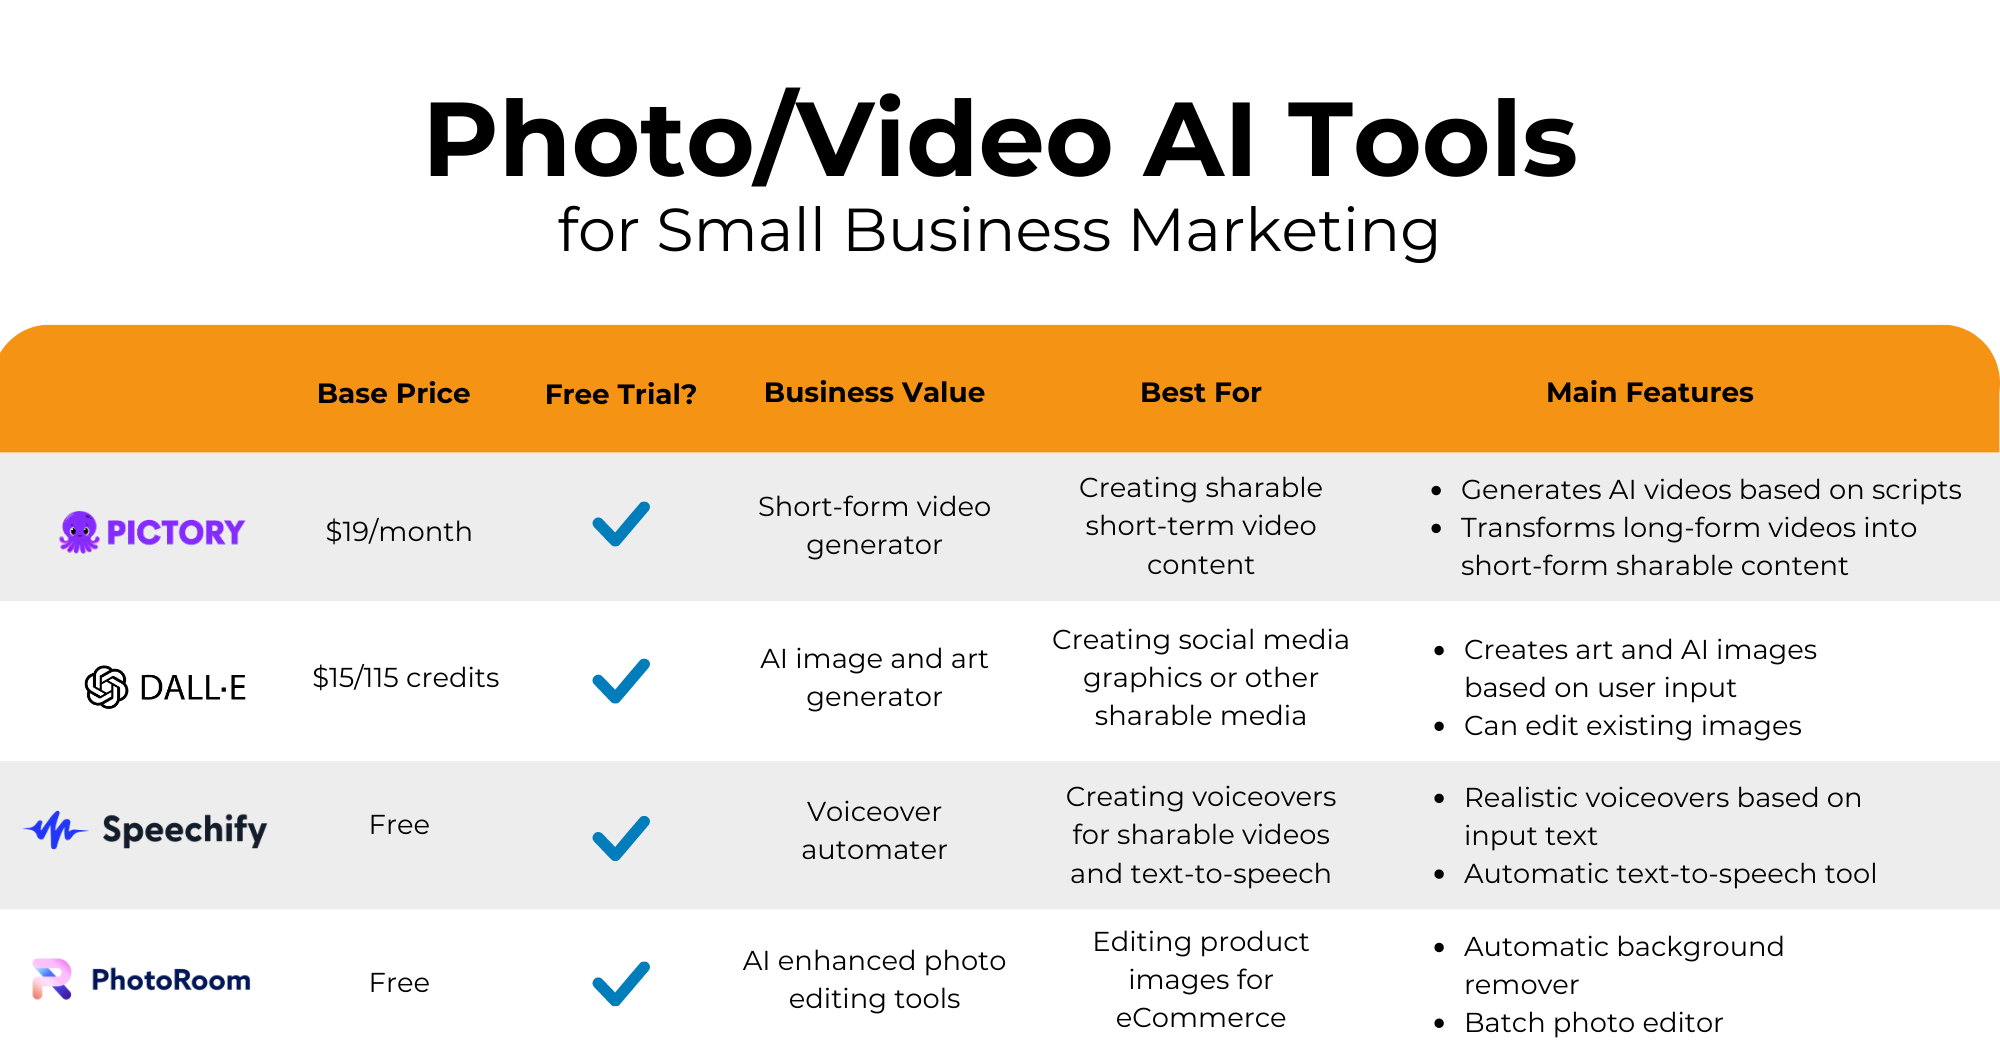 Chart view of best photo and video generating ai tools, restating previous information in a visual format of blog article with helpful marketing tips for small business.